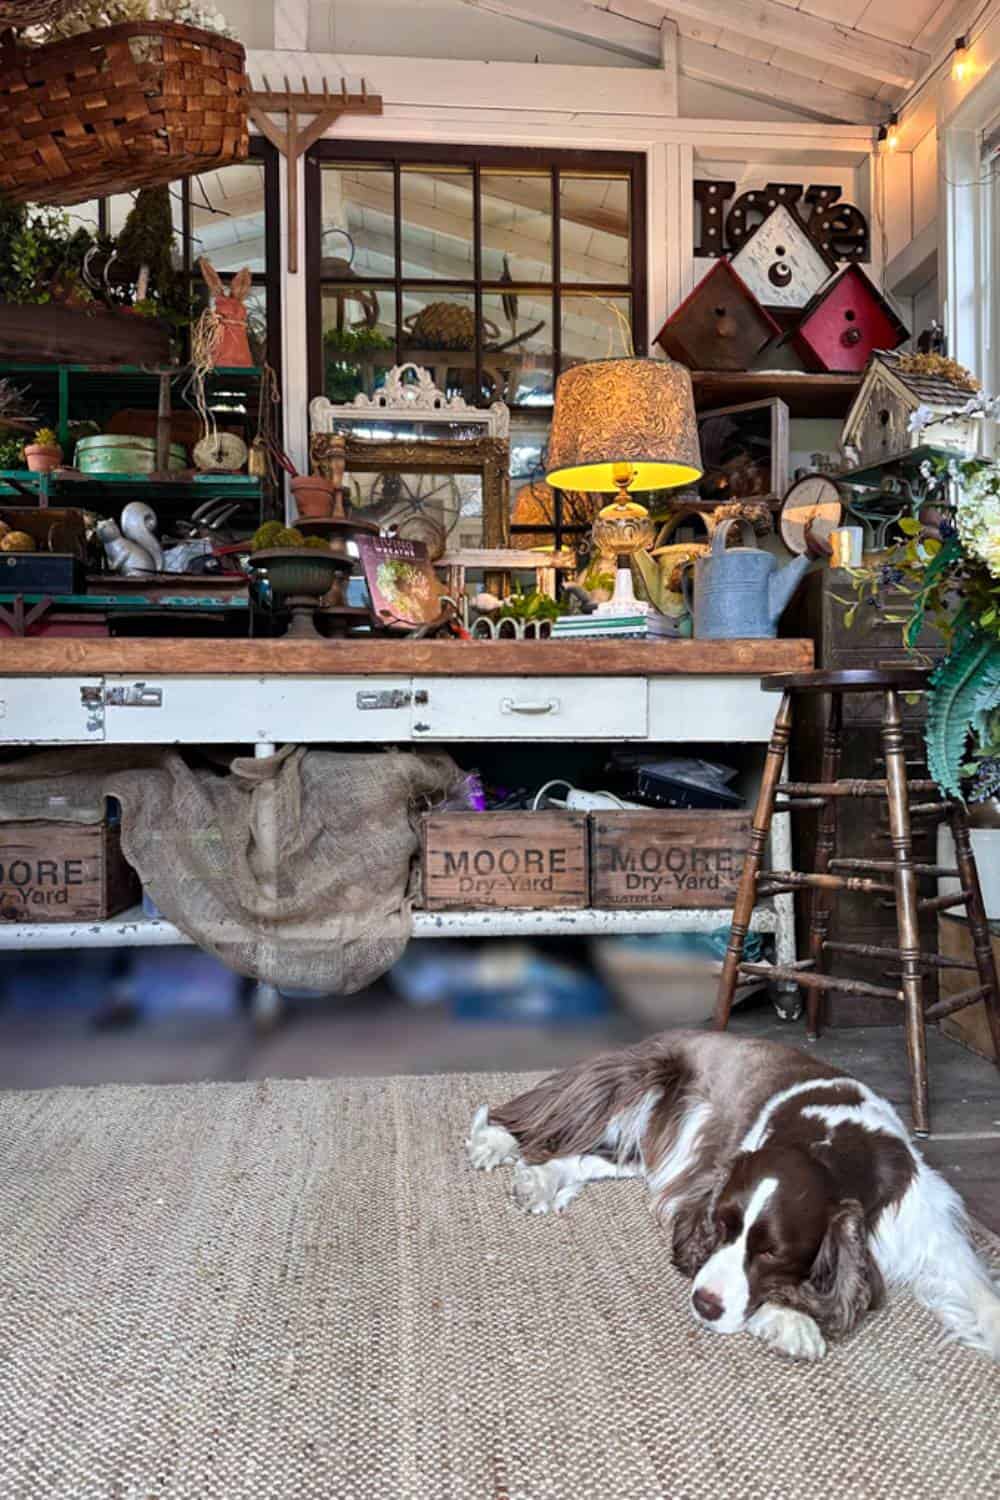 Inside the summer She Shed with a view of the work desk a stool, vintage garden decor, and my dog Mollie sleeping on the floor